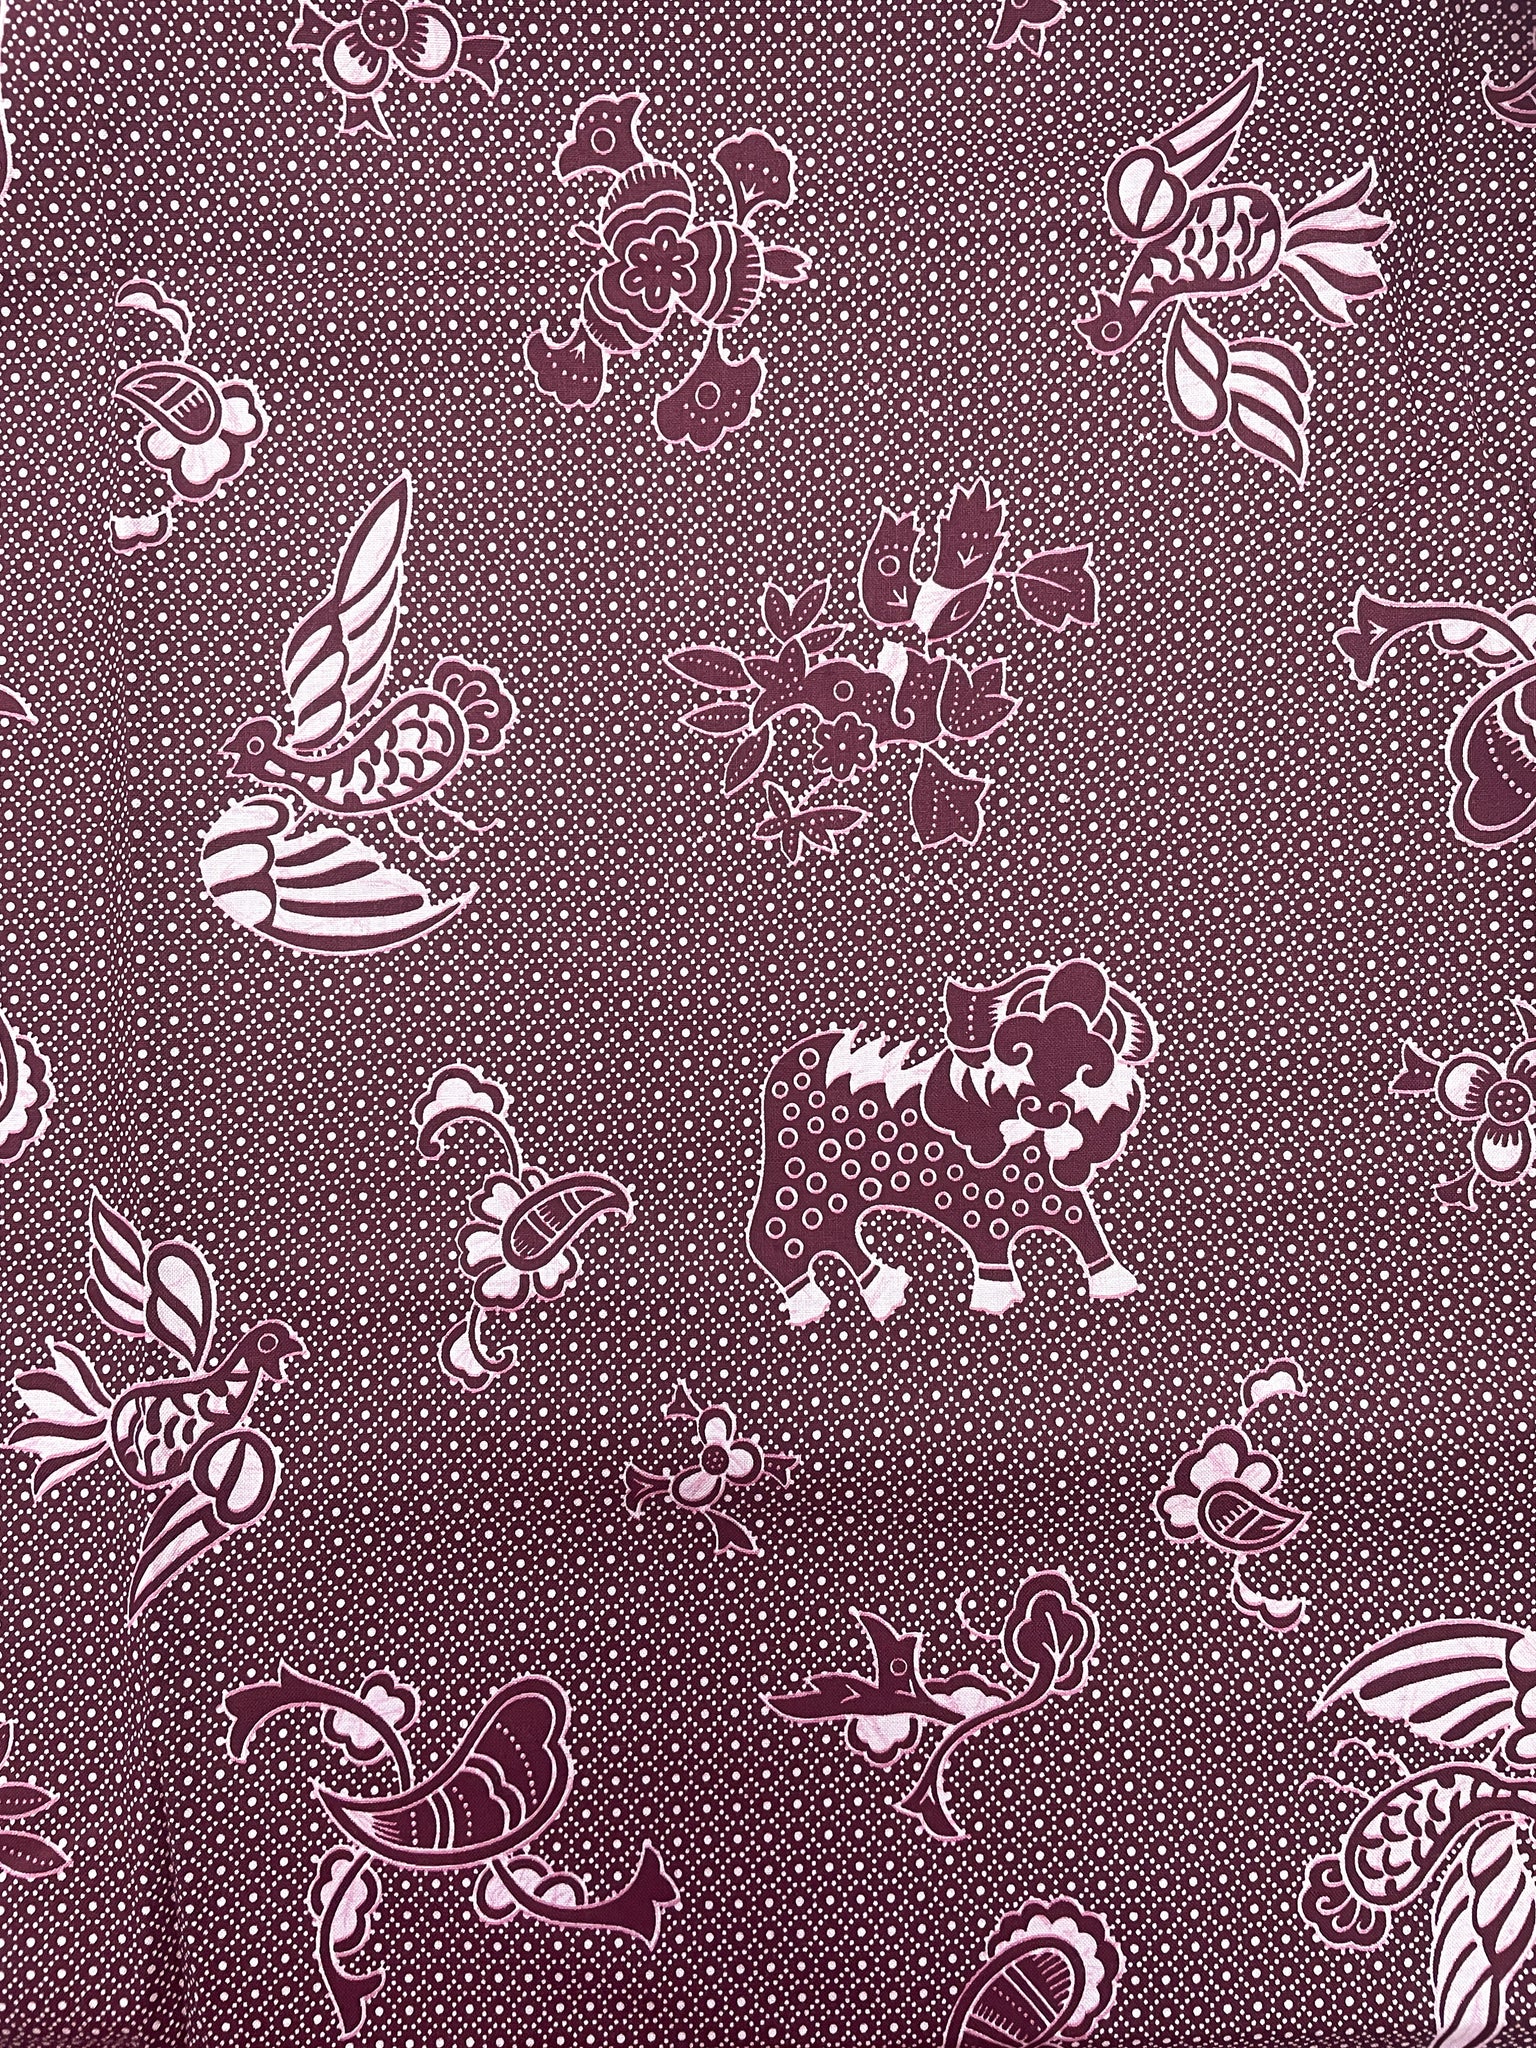 3 YD Quilting Cotton Faux Batik Print - Burgundy with Animals and Flowers